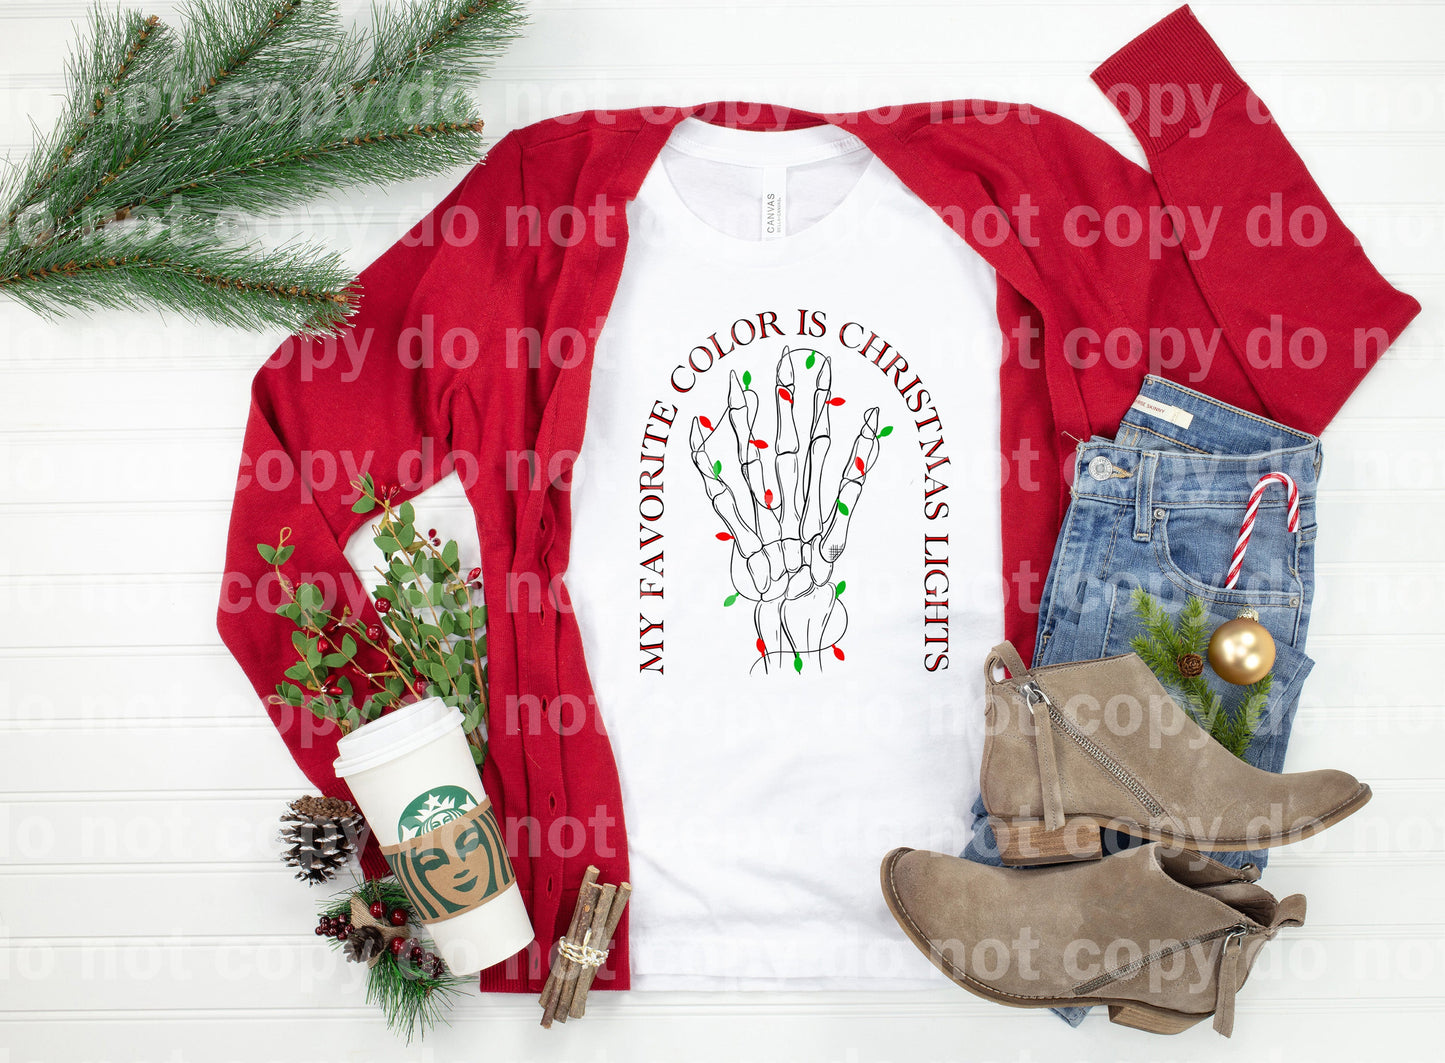 My Favorite Color Is Christmas Lights Dream Print or Sublimation Print